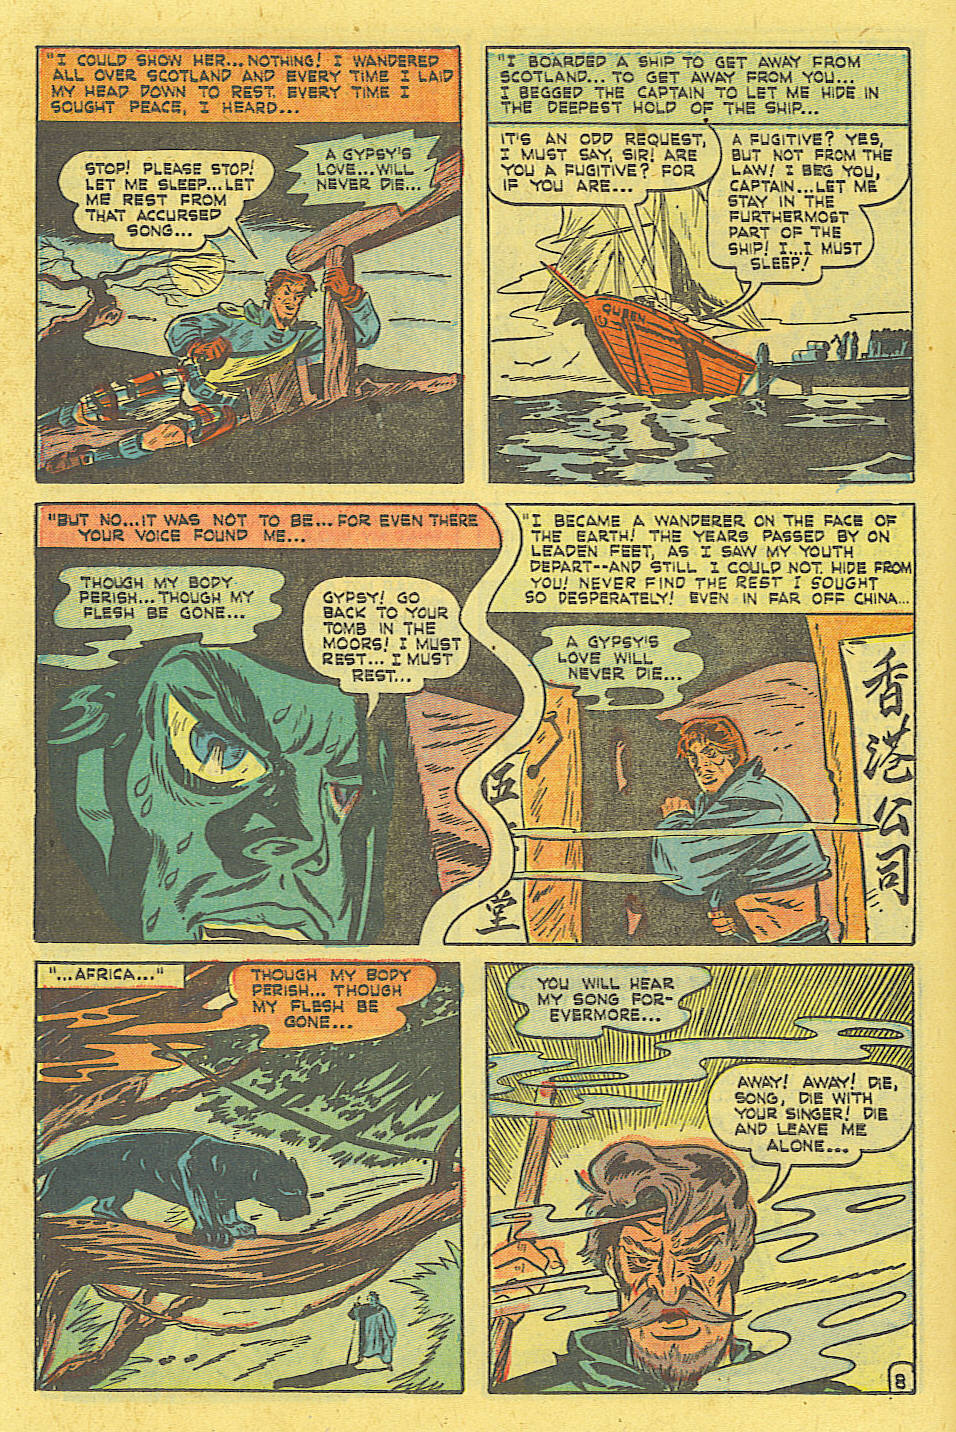 Marvel Tales (1949) 95 Page 17